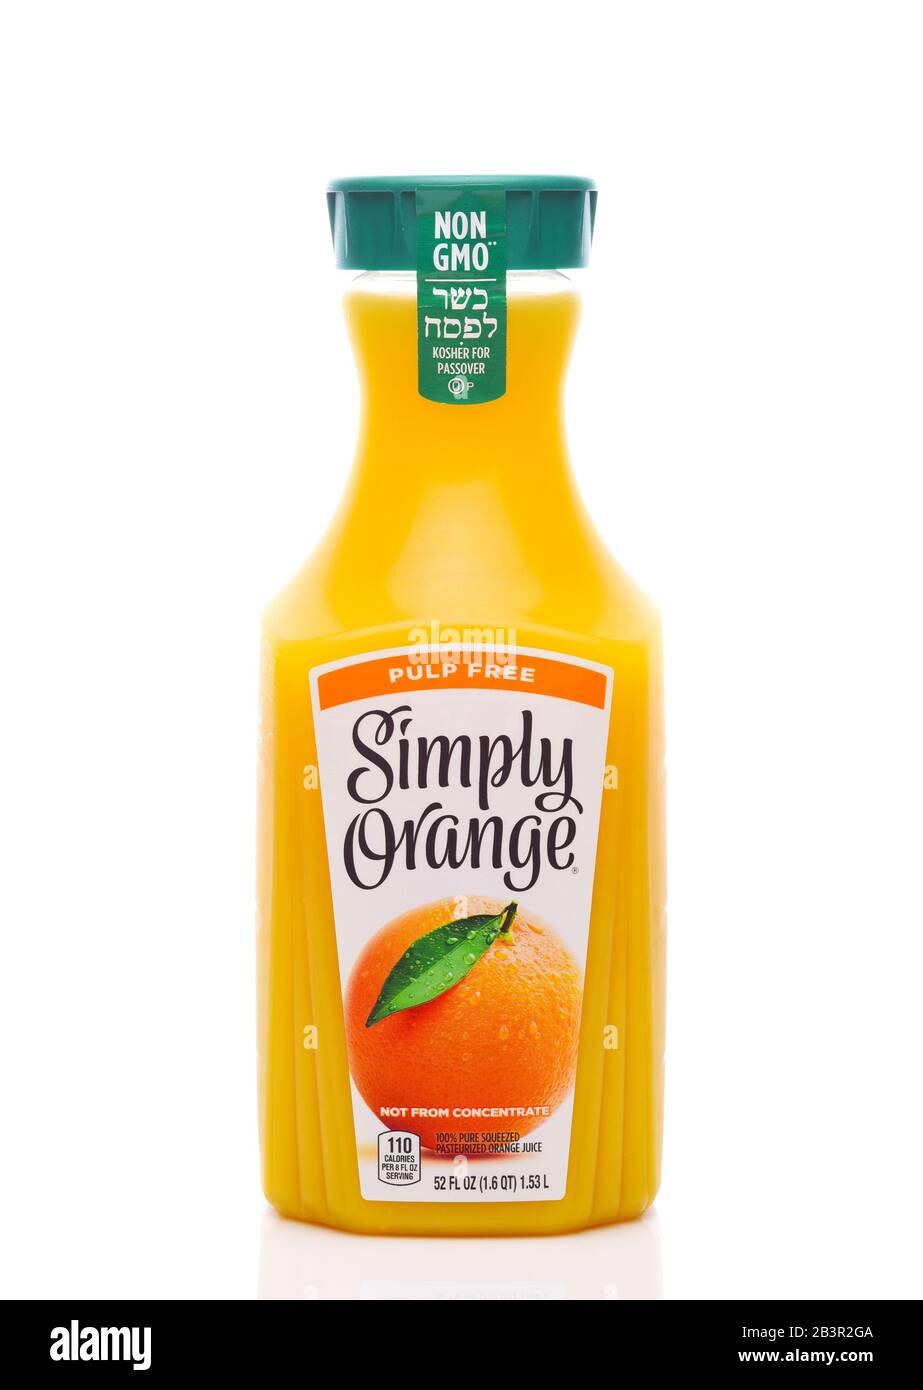 IRVINE, CALIFORNIA - MAY 20, 2019: Simply Orange Pulp Free Orange Juice. The company, based in Florida, is a brand of the Coca-Cola Company. - Image Stock Photo